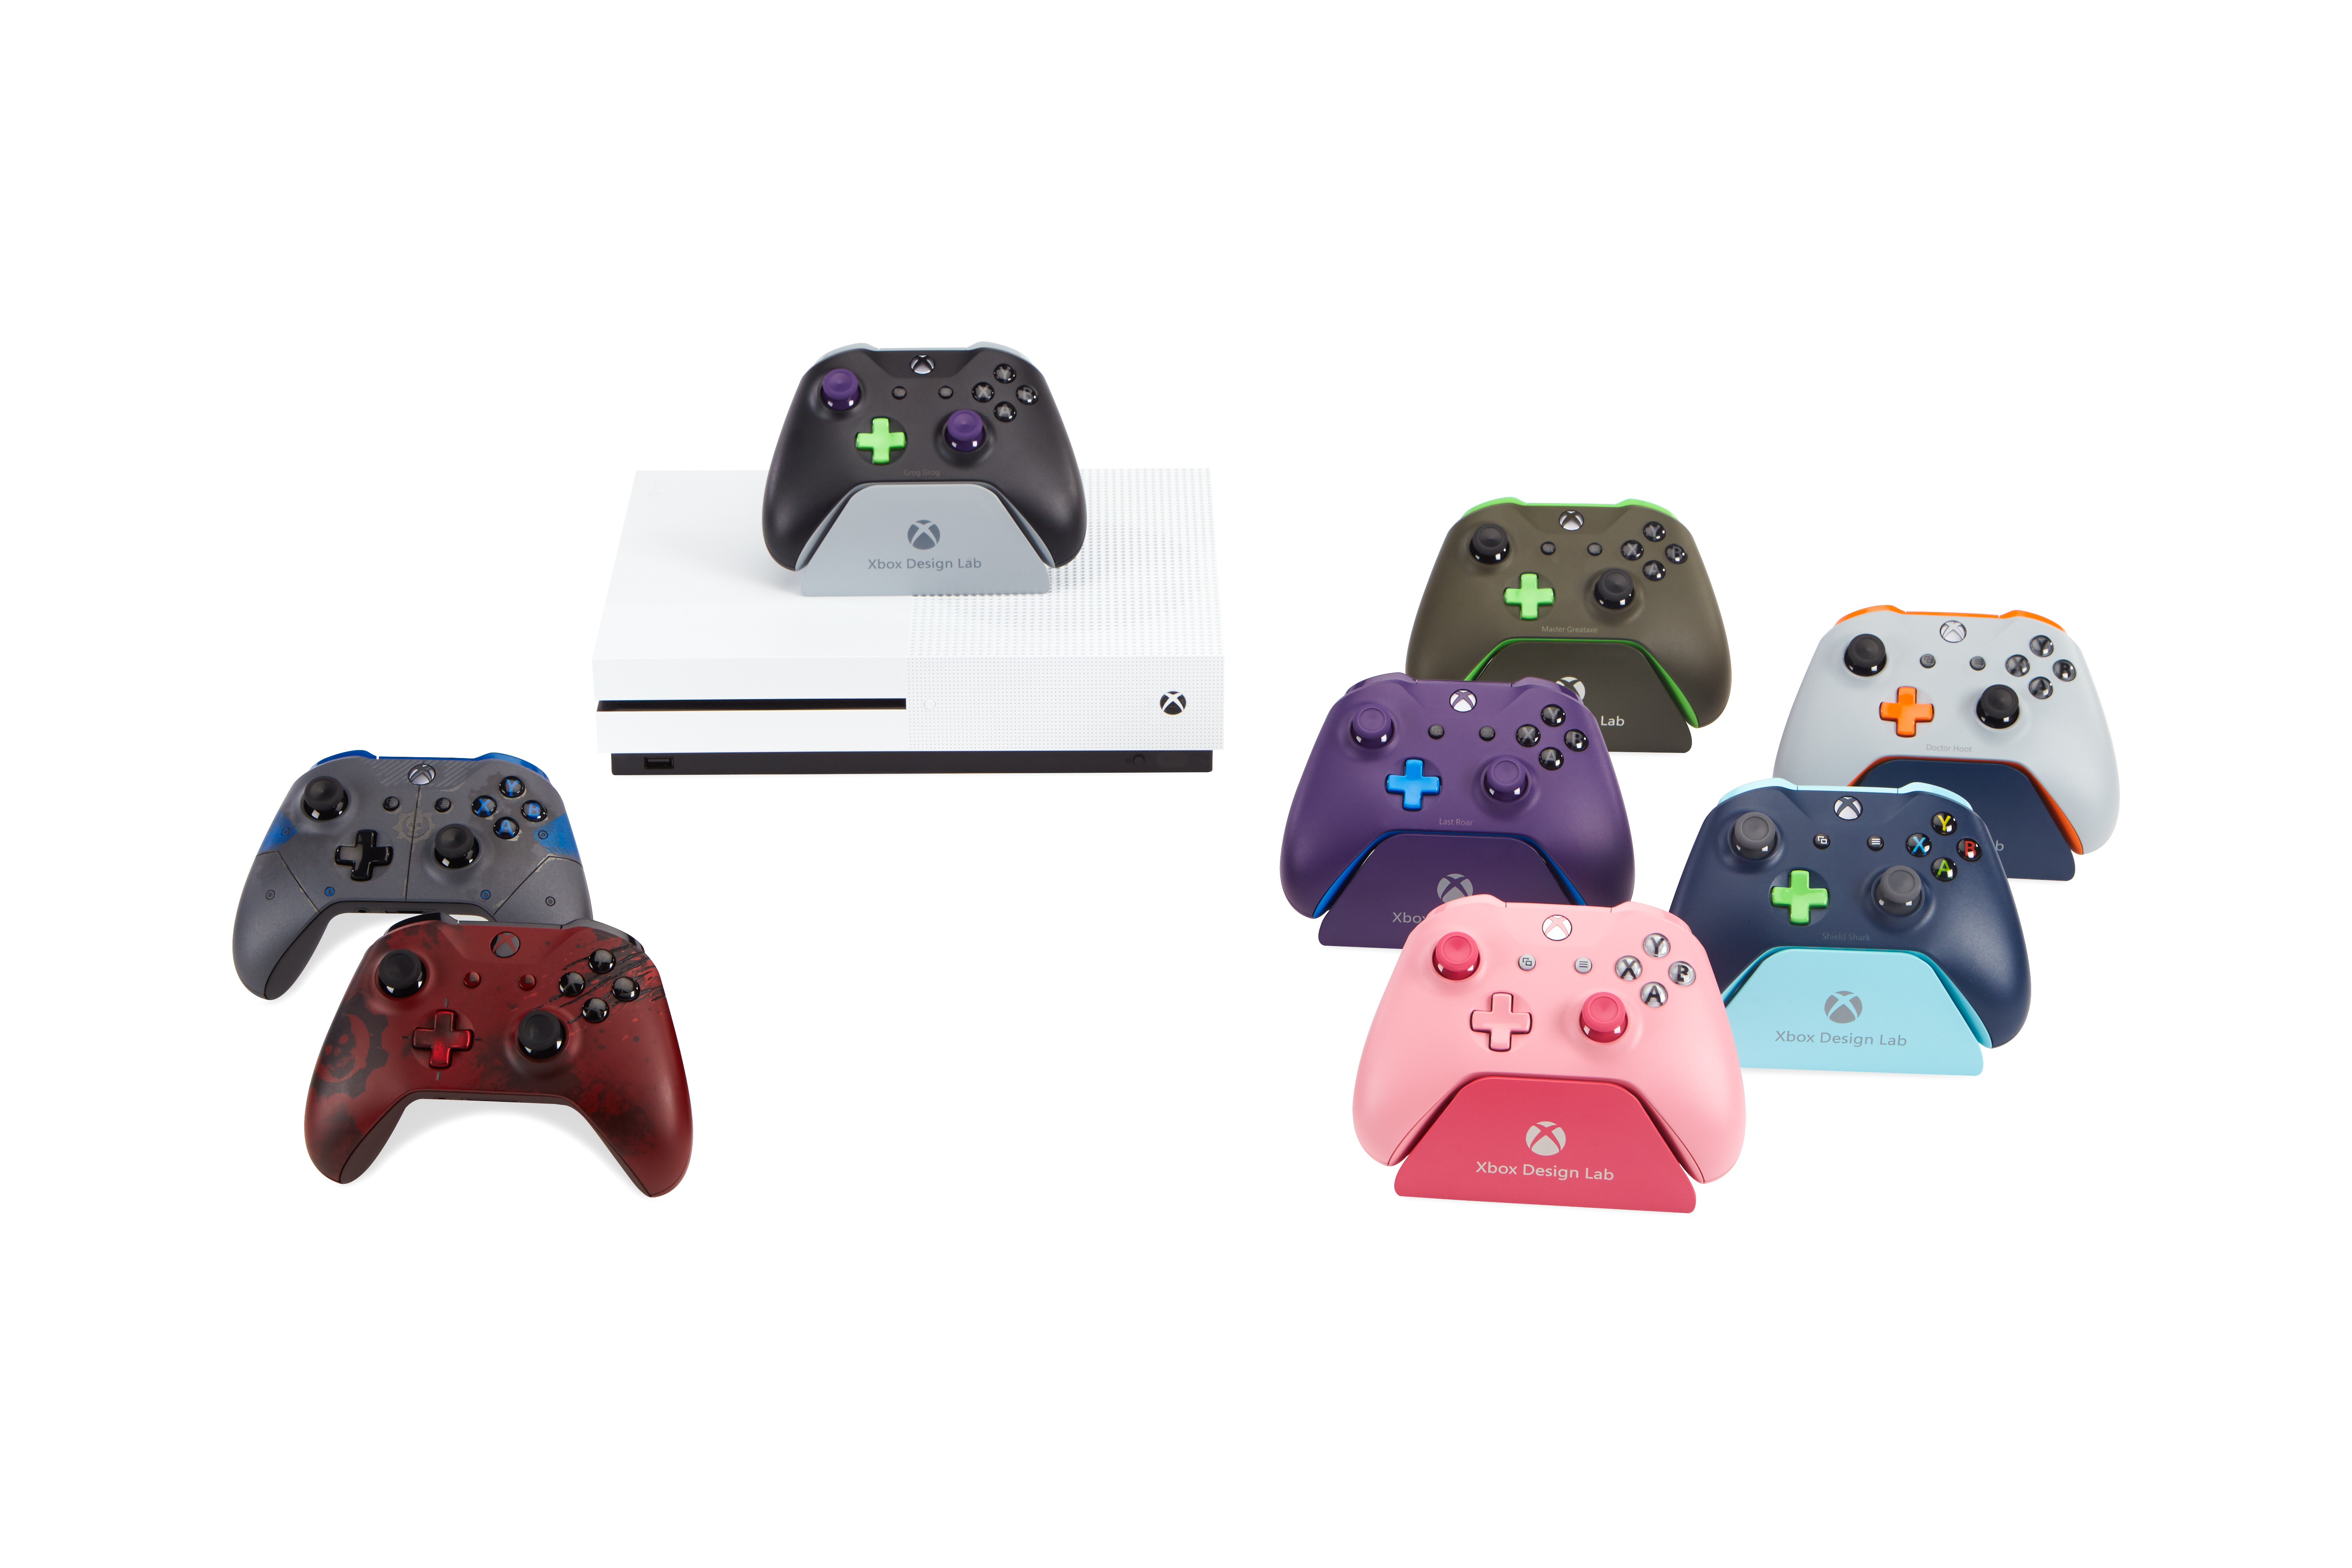 Picture of various Xbox Wireless Controllers available this holiday